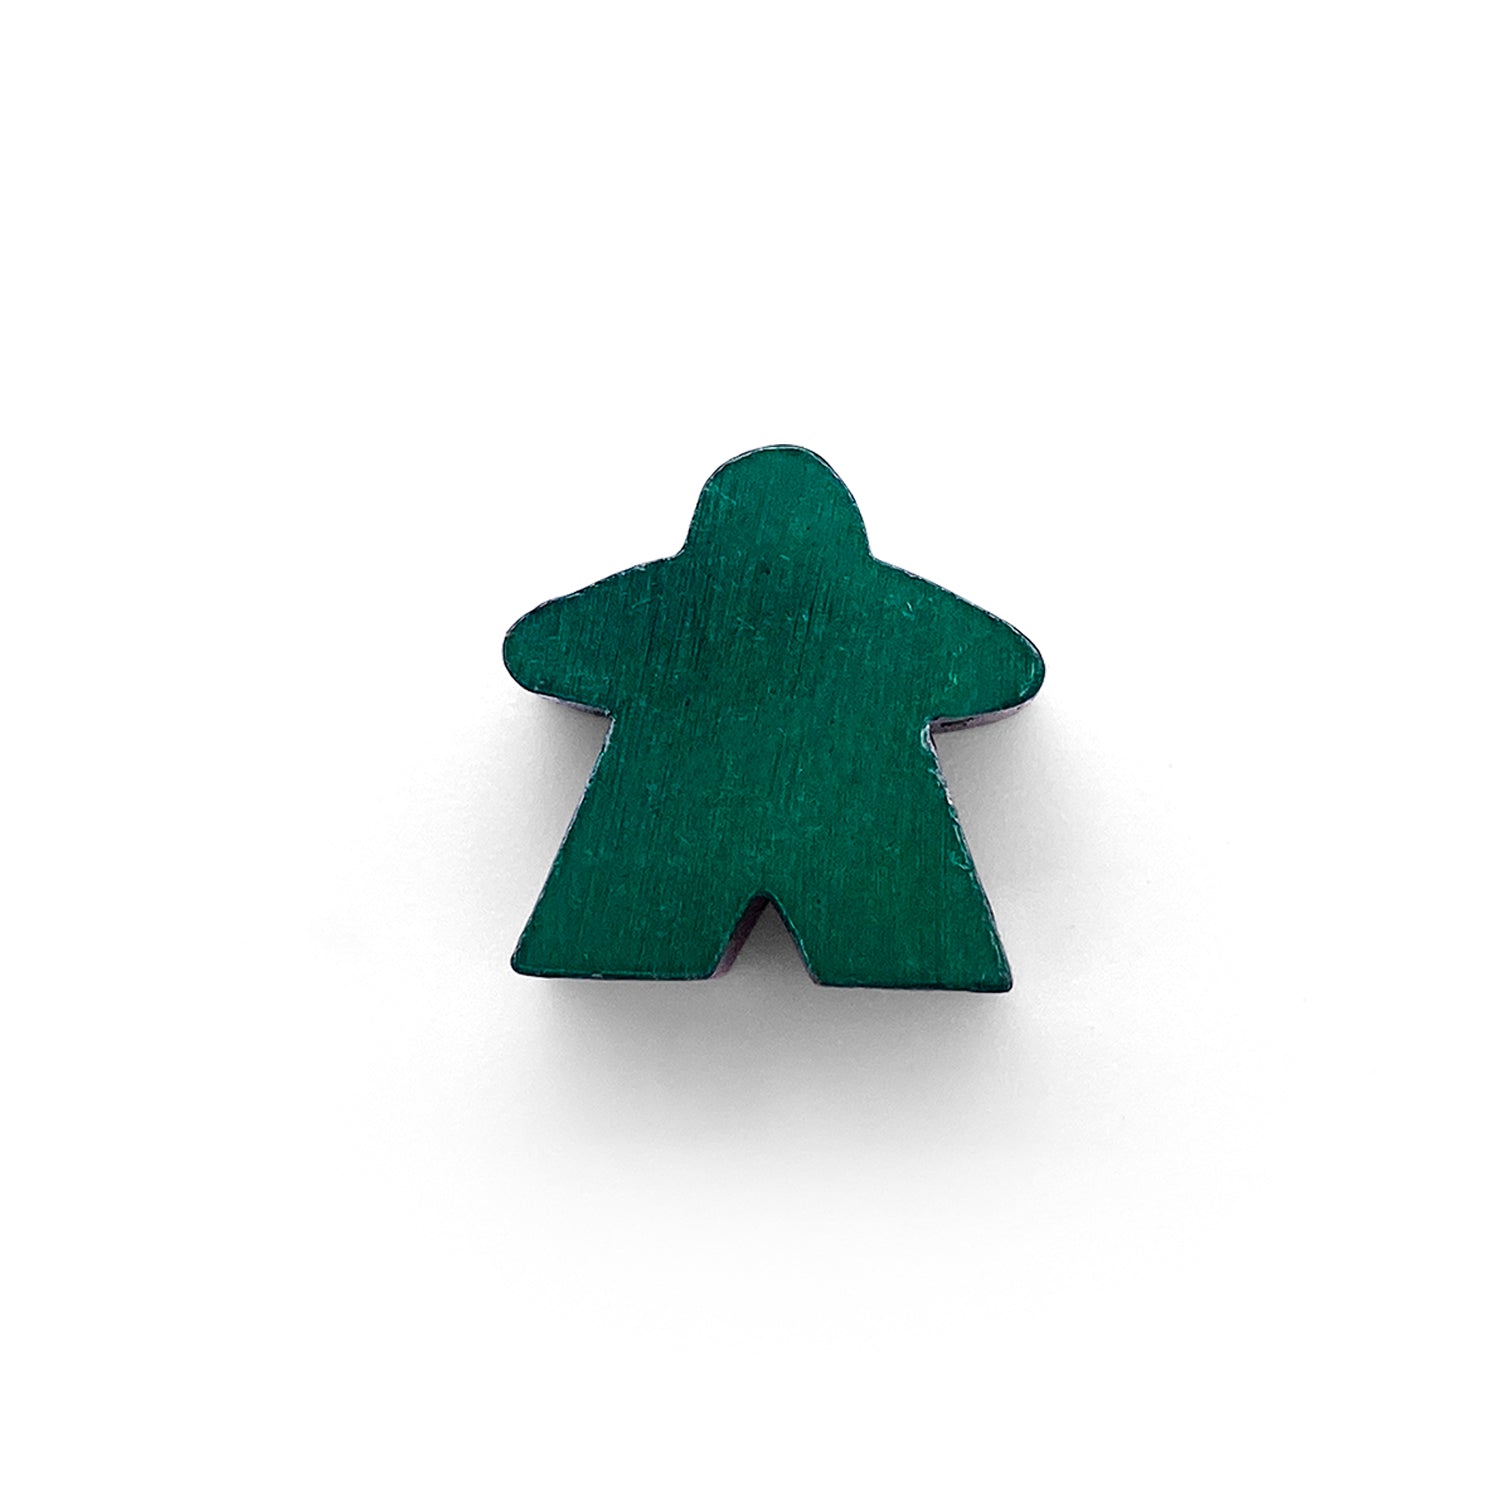 8 Pack of Green Enamel Meeples by Norse Foundry